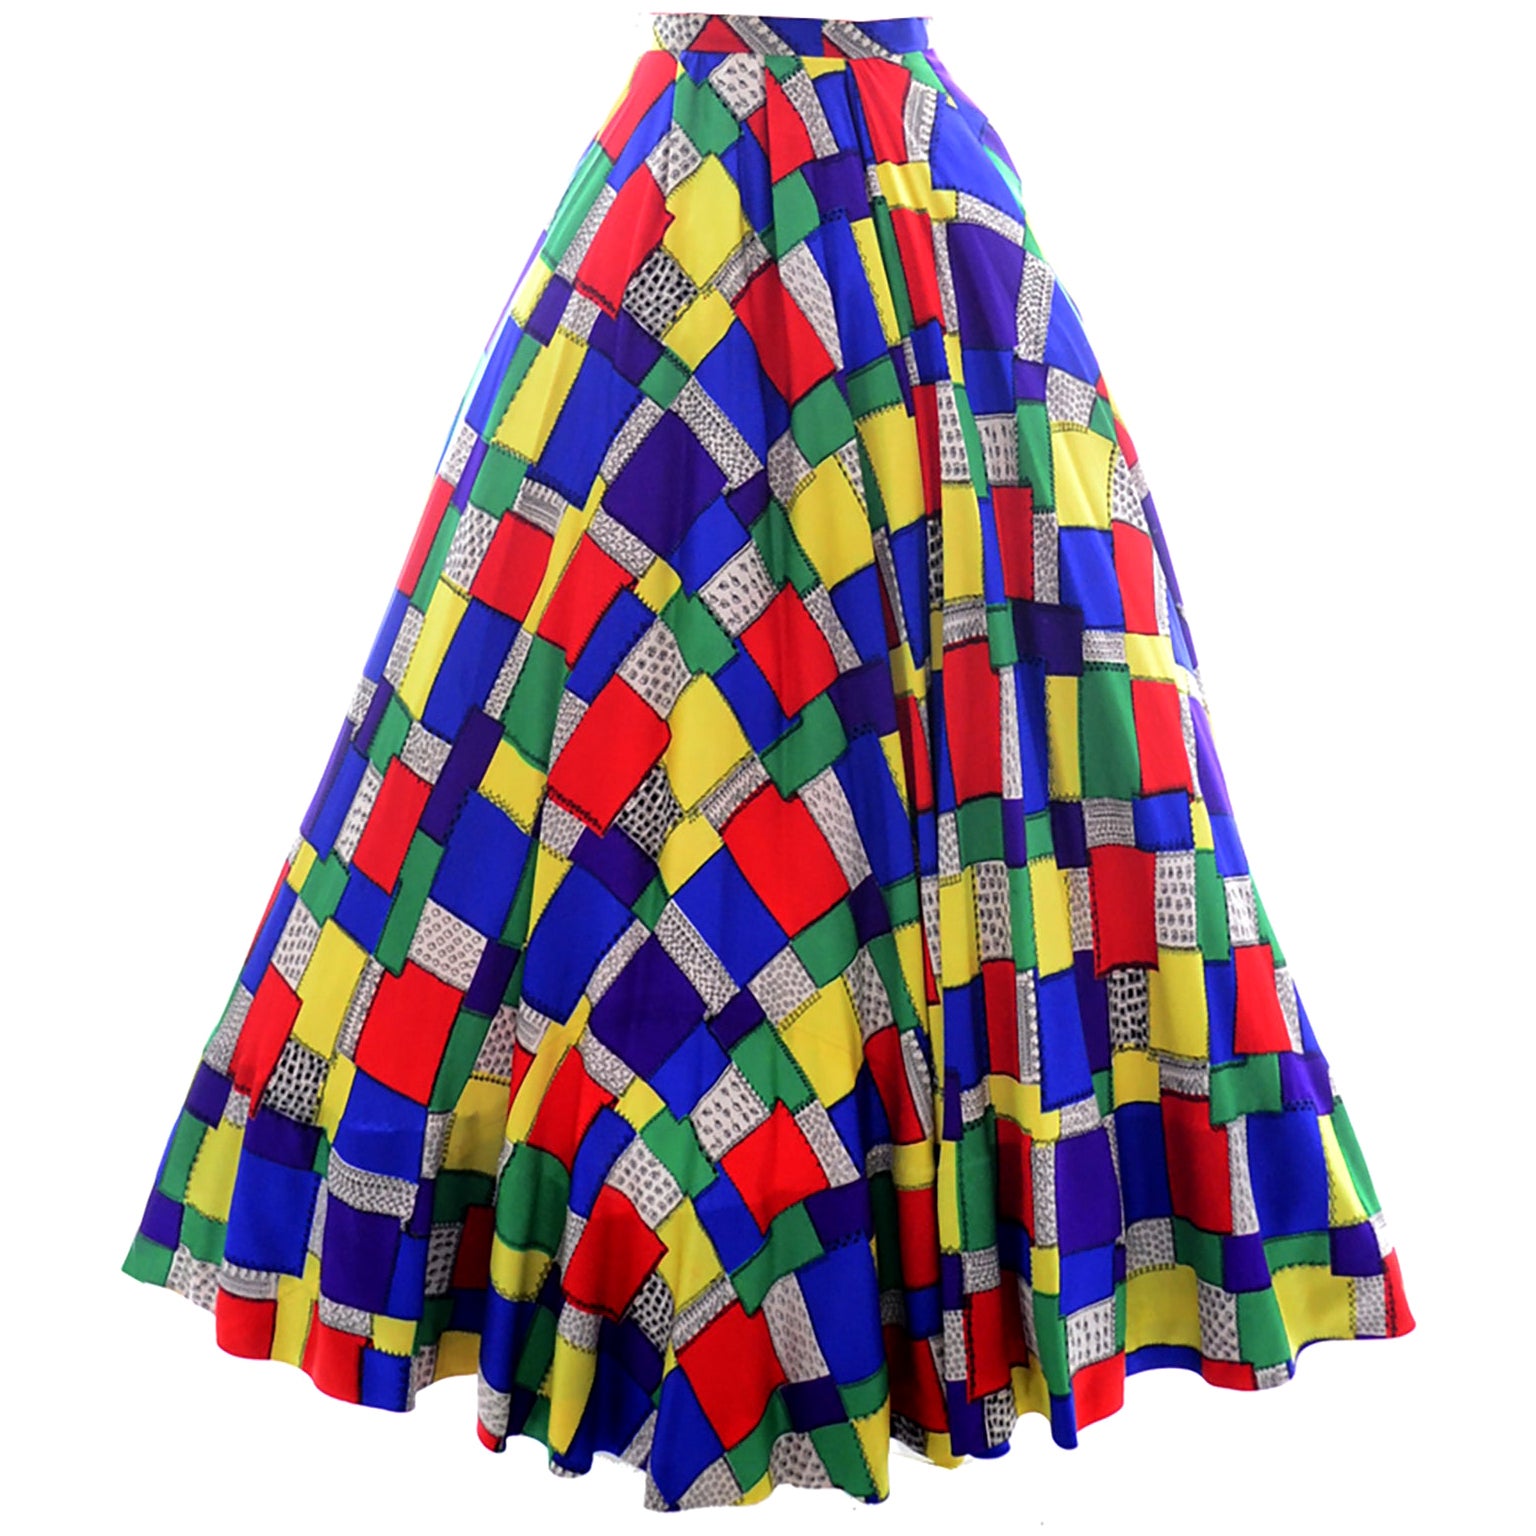 1940s Vintage Skirt in Patchwork Color block Print from Gilbert Adrian Collector